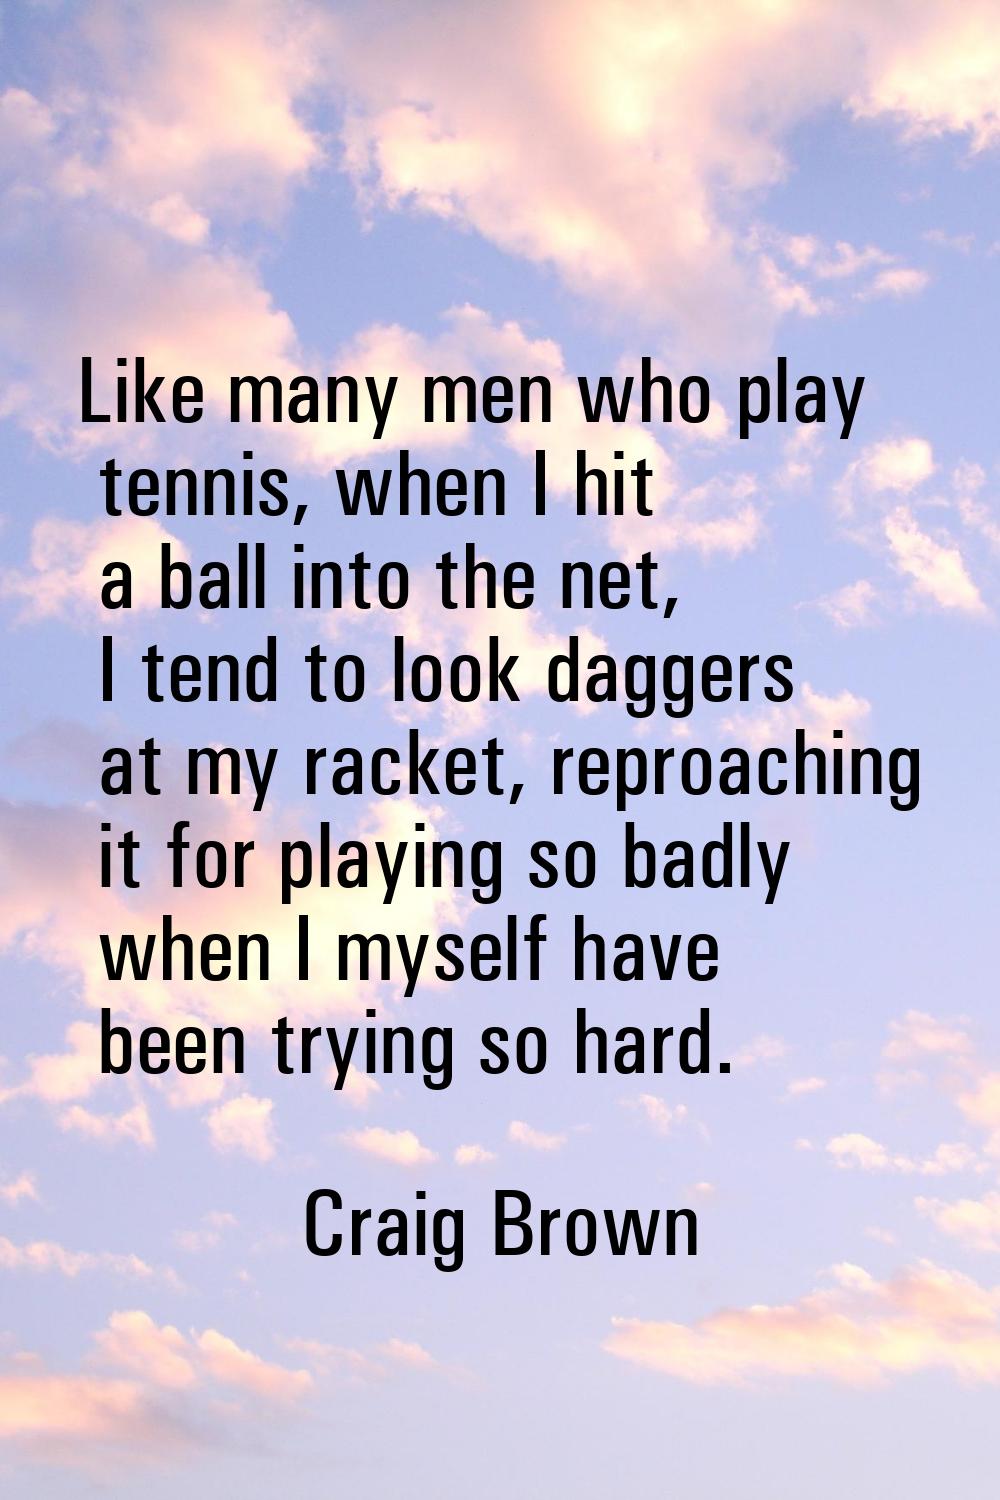 Like many men who play tennis, when I hit a ball into the net, I tend to look daggers at my racket,